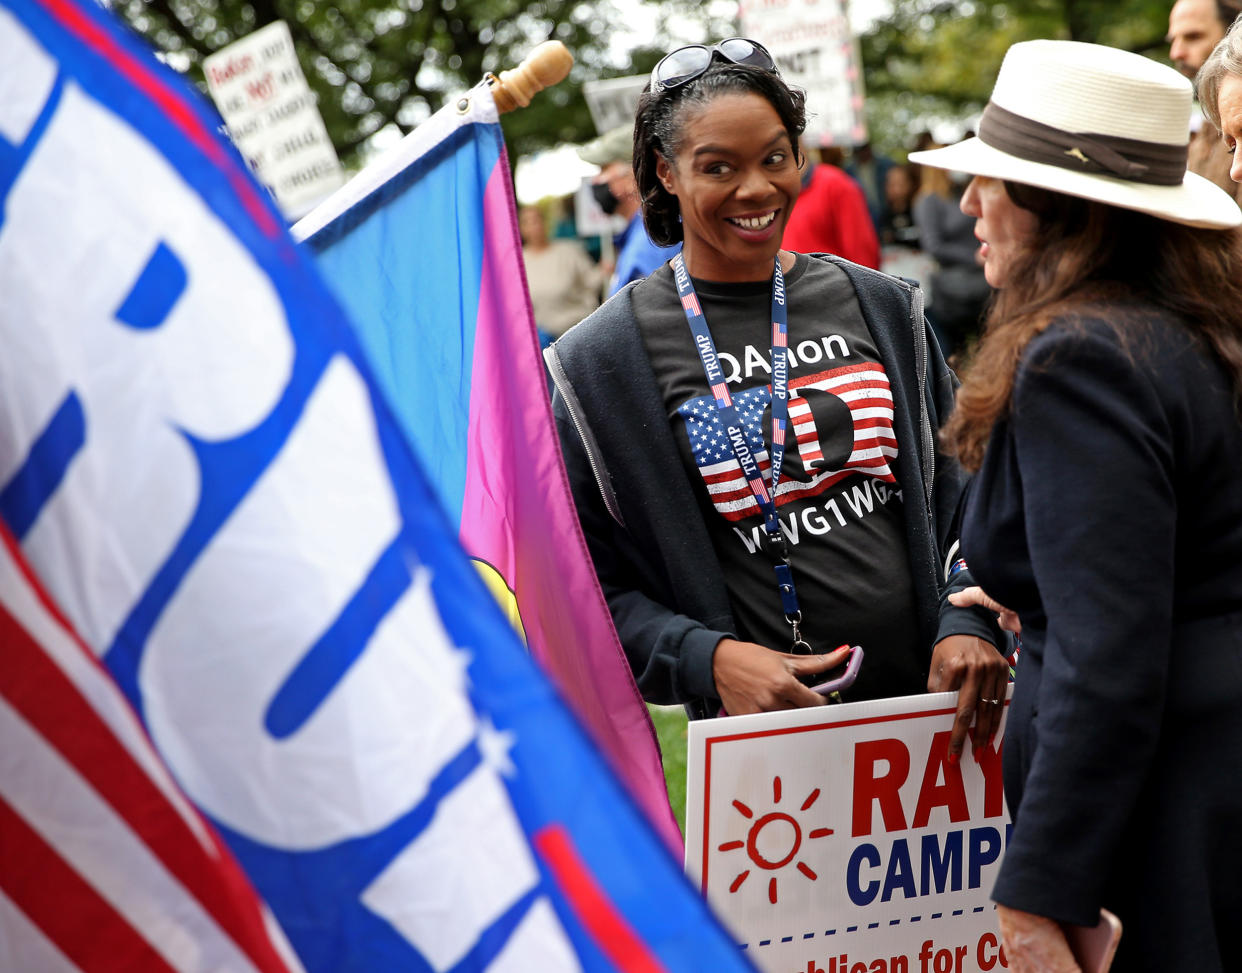 Rayla Campbell at a rally outside the Federal Court House in Boston (Matt Stone / MediaNews Group/Boston Herald via Getty Images file)